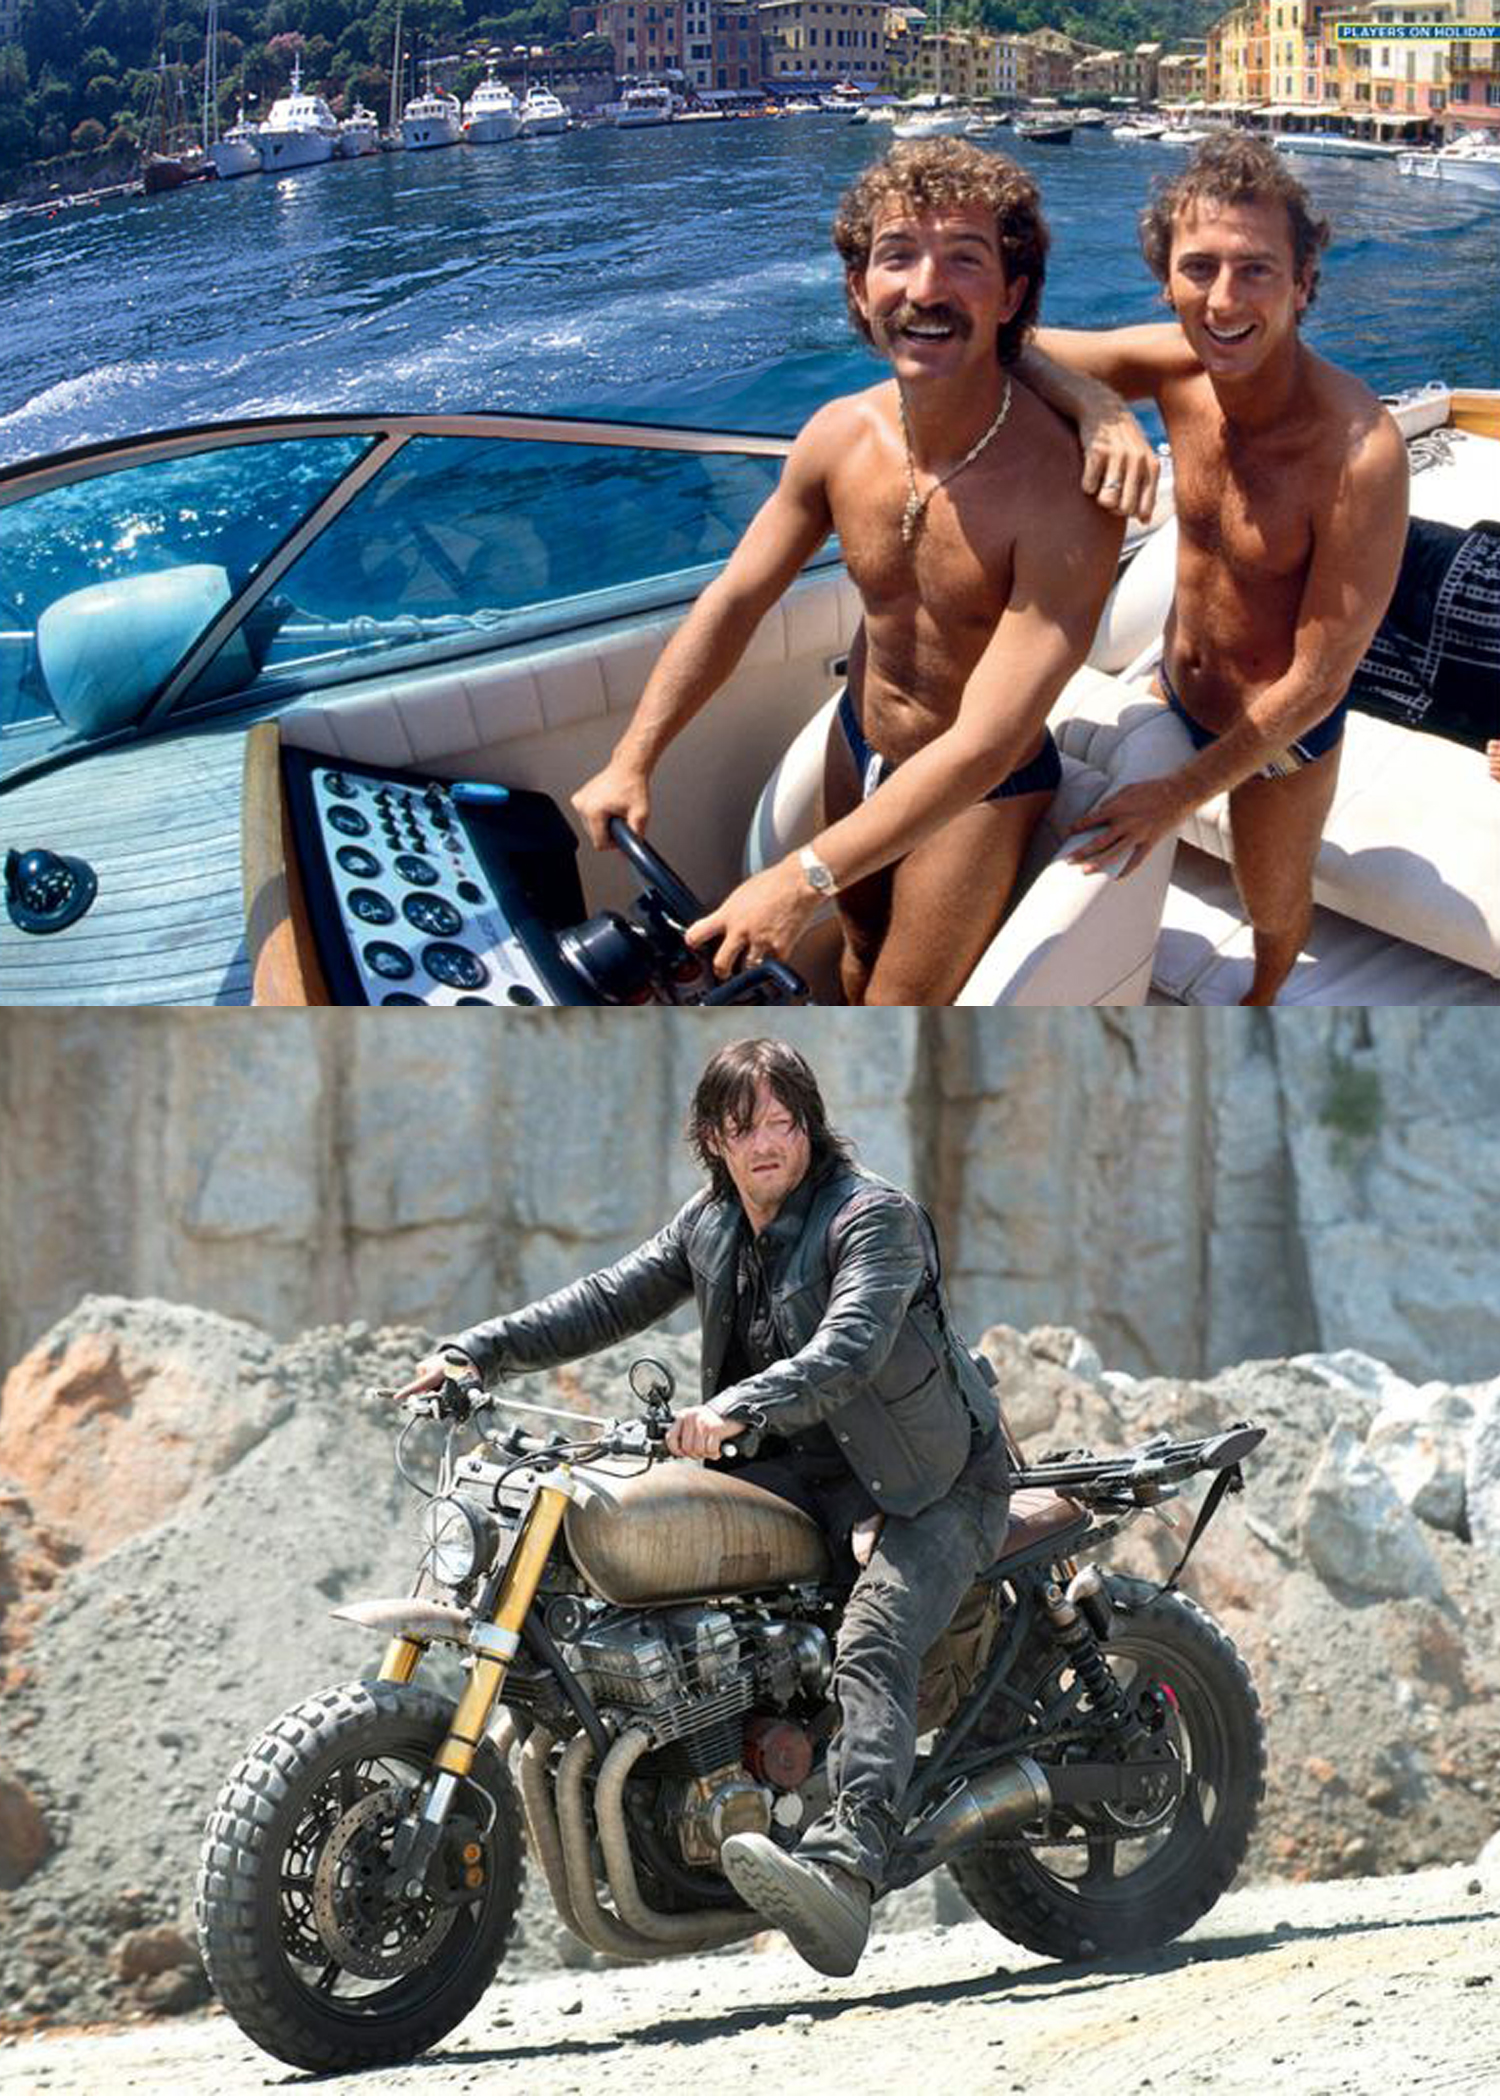 High Quality boats and motorcycles Blank Meme Template